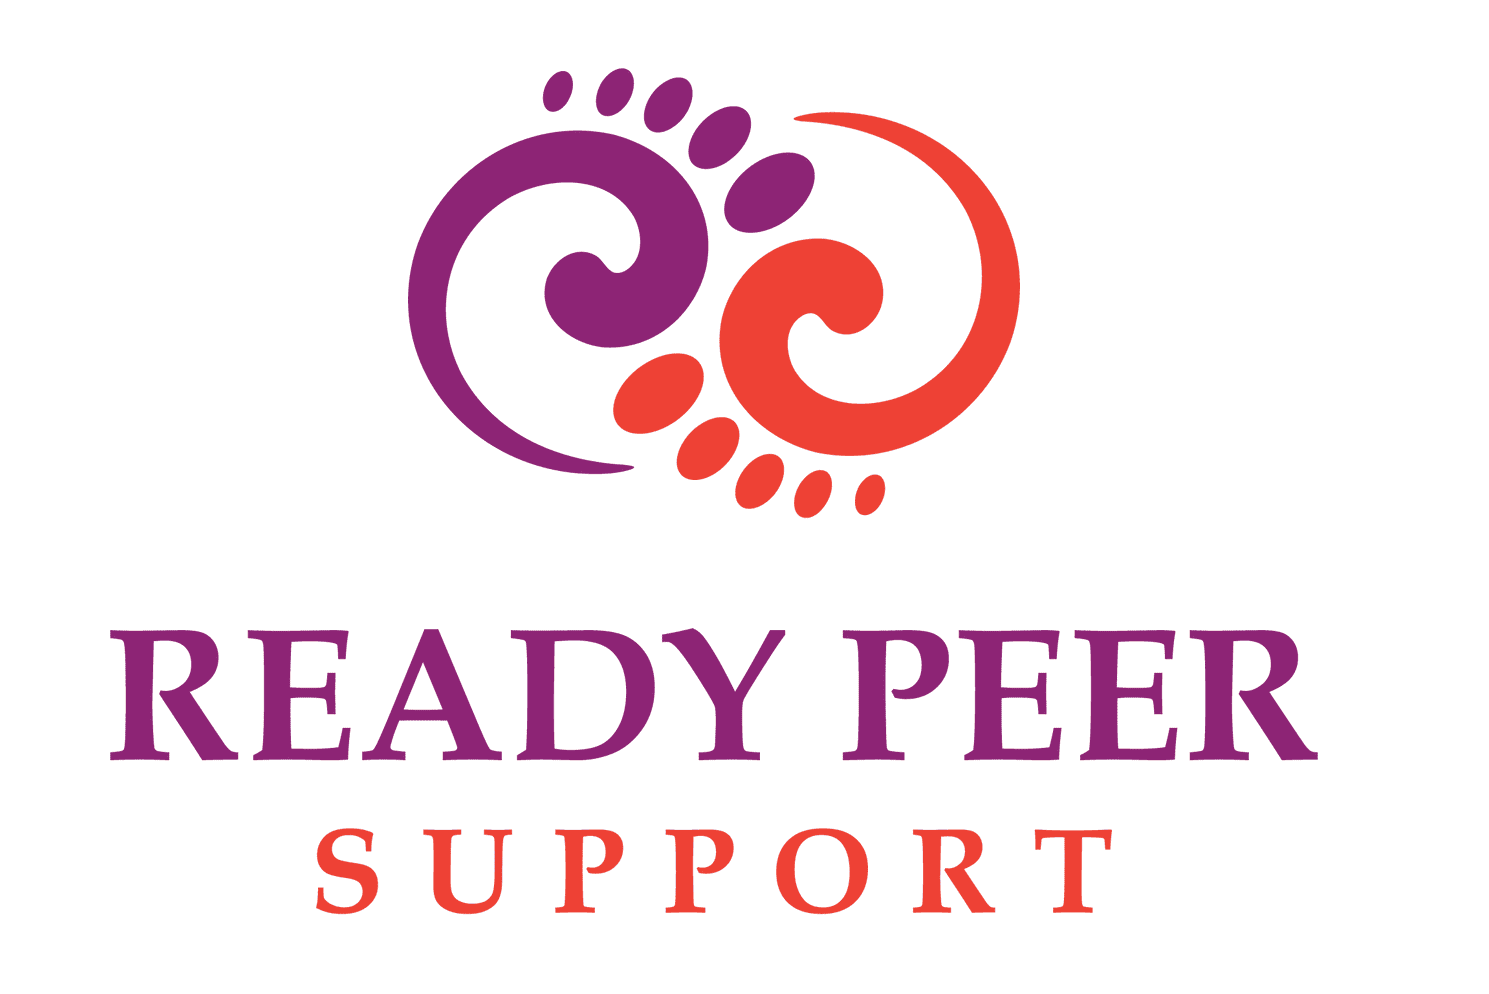 A logo for the ready peel support program.